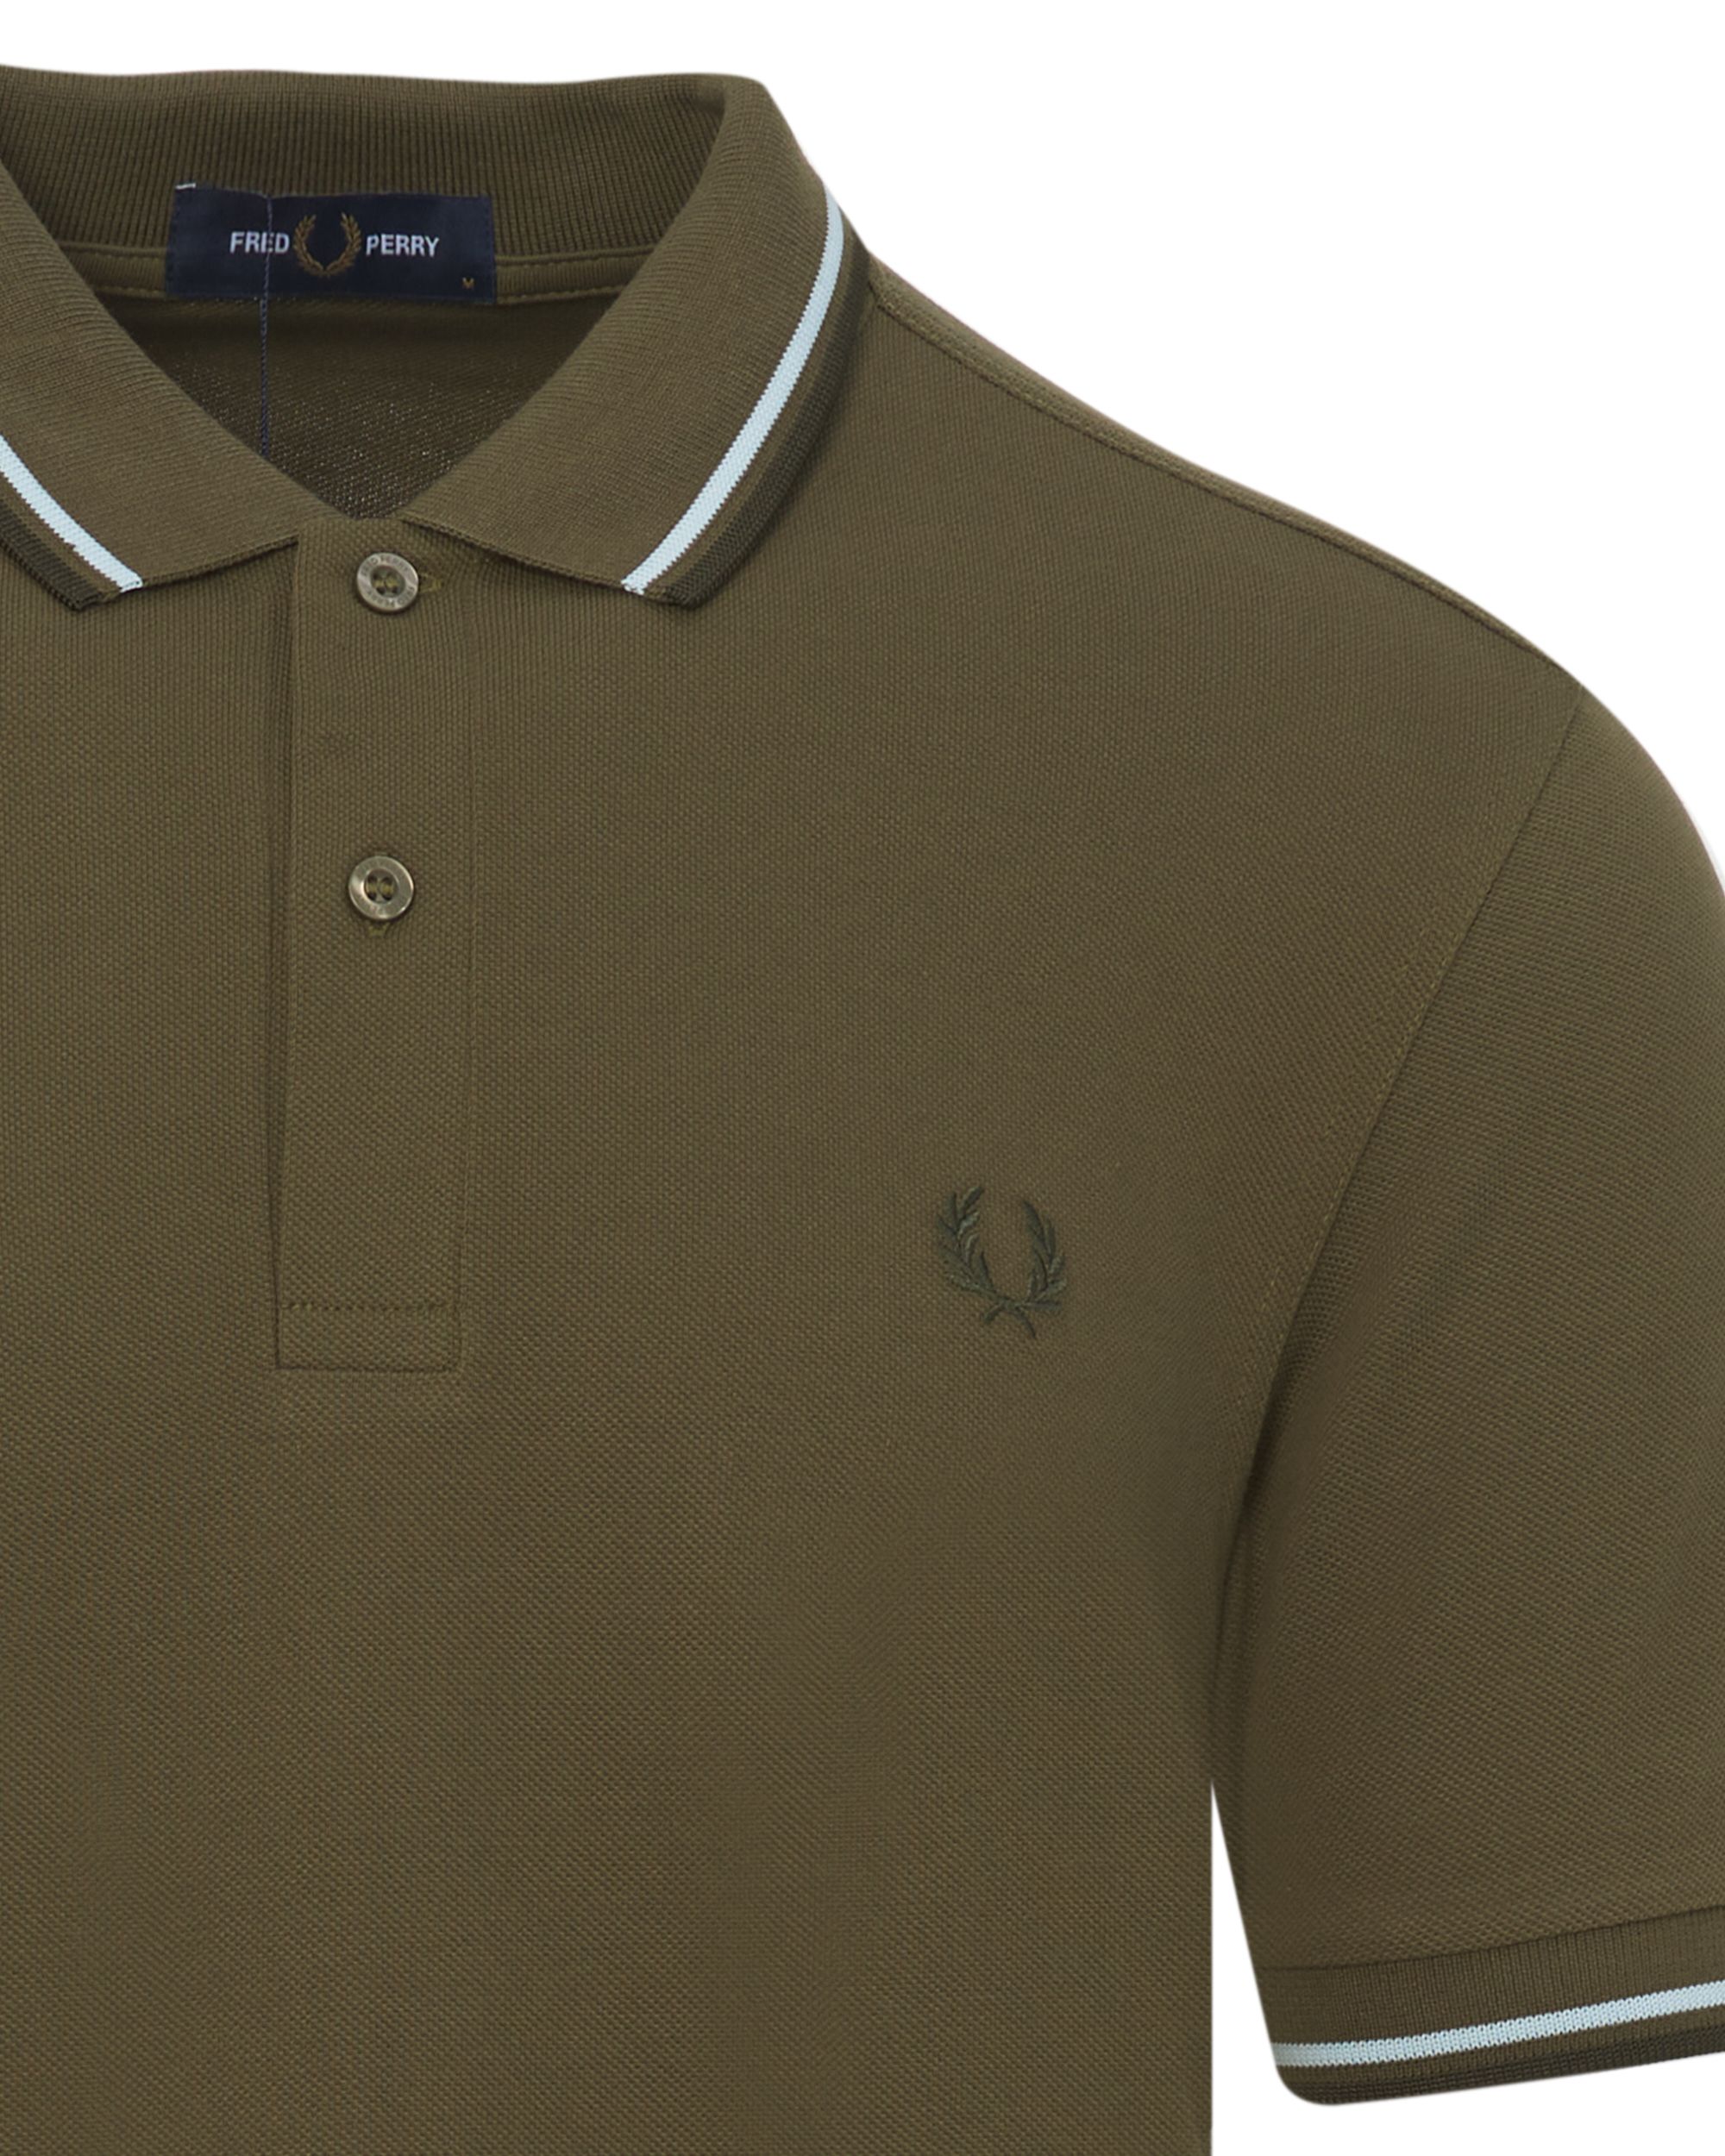 Fred Perry Polo KM Groen 083526-001-L